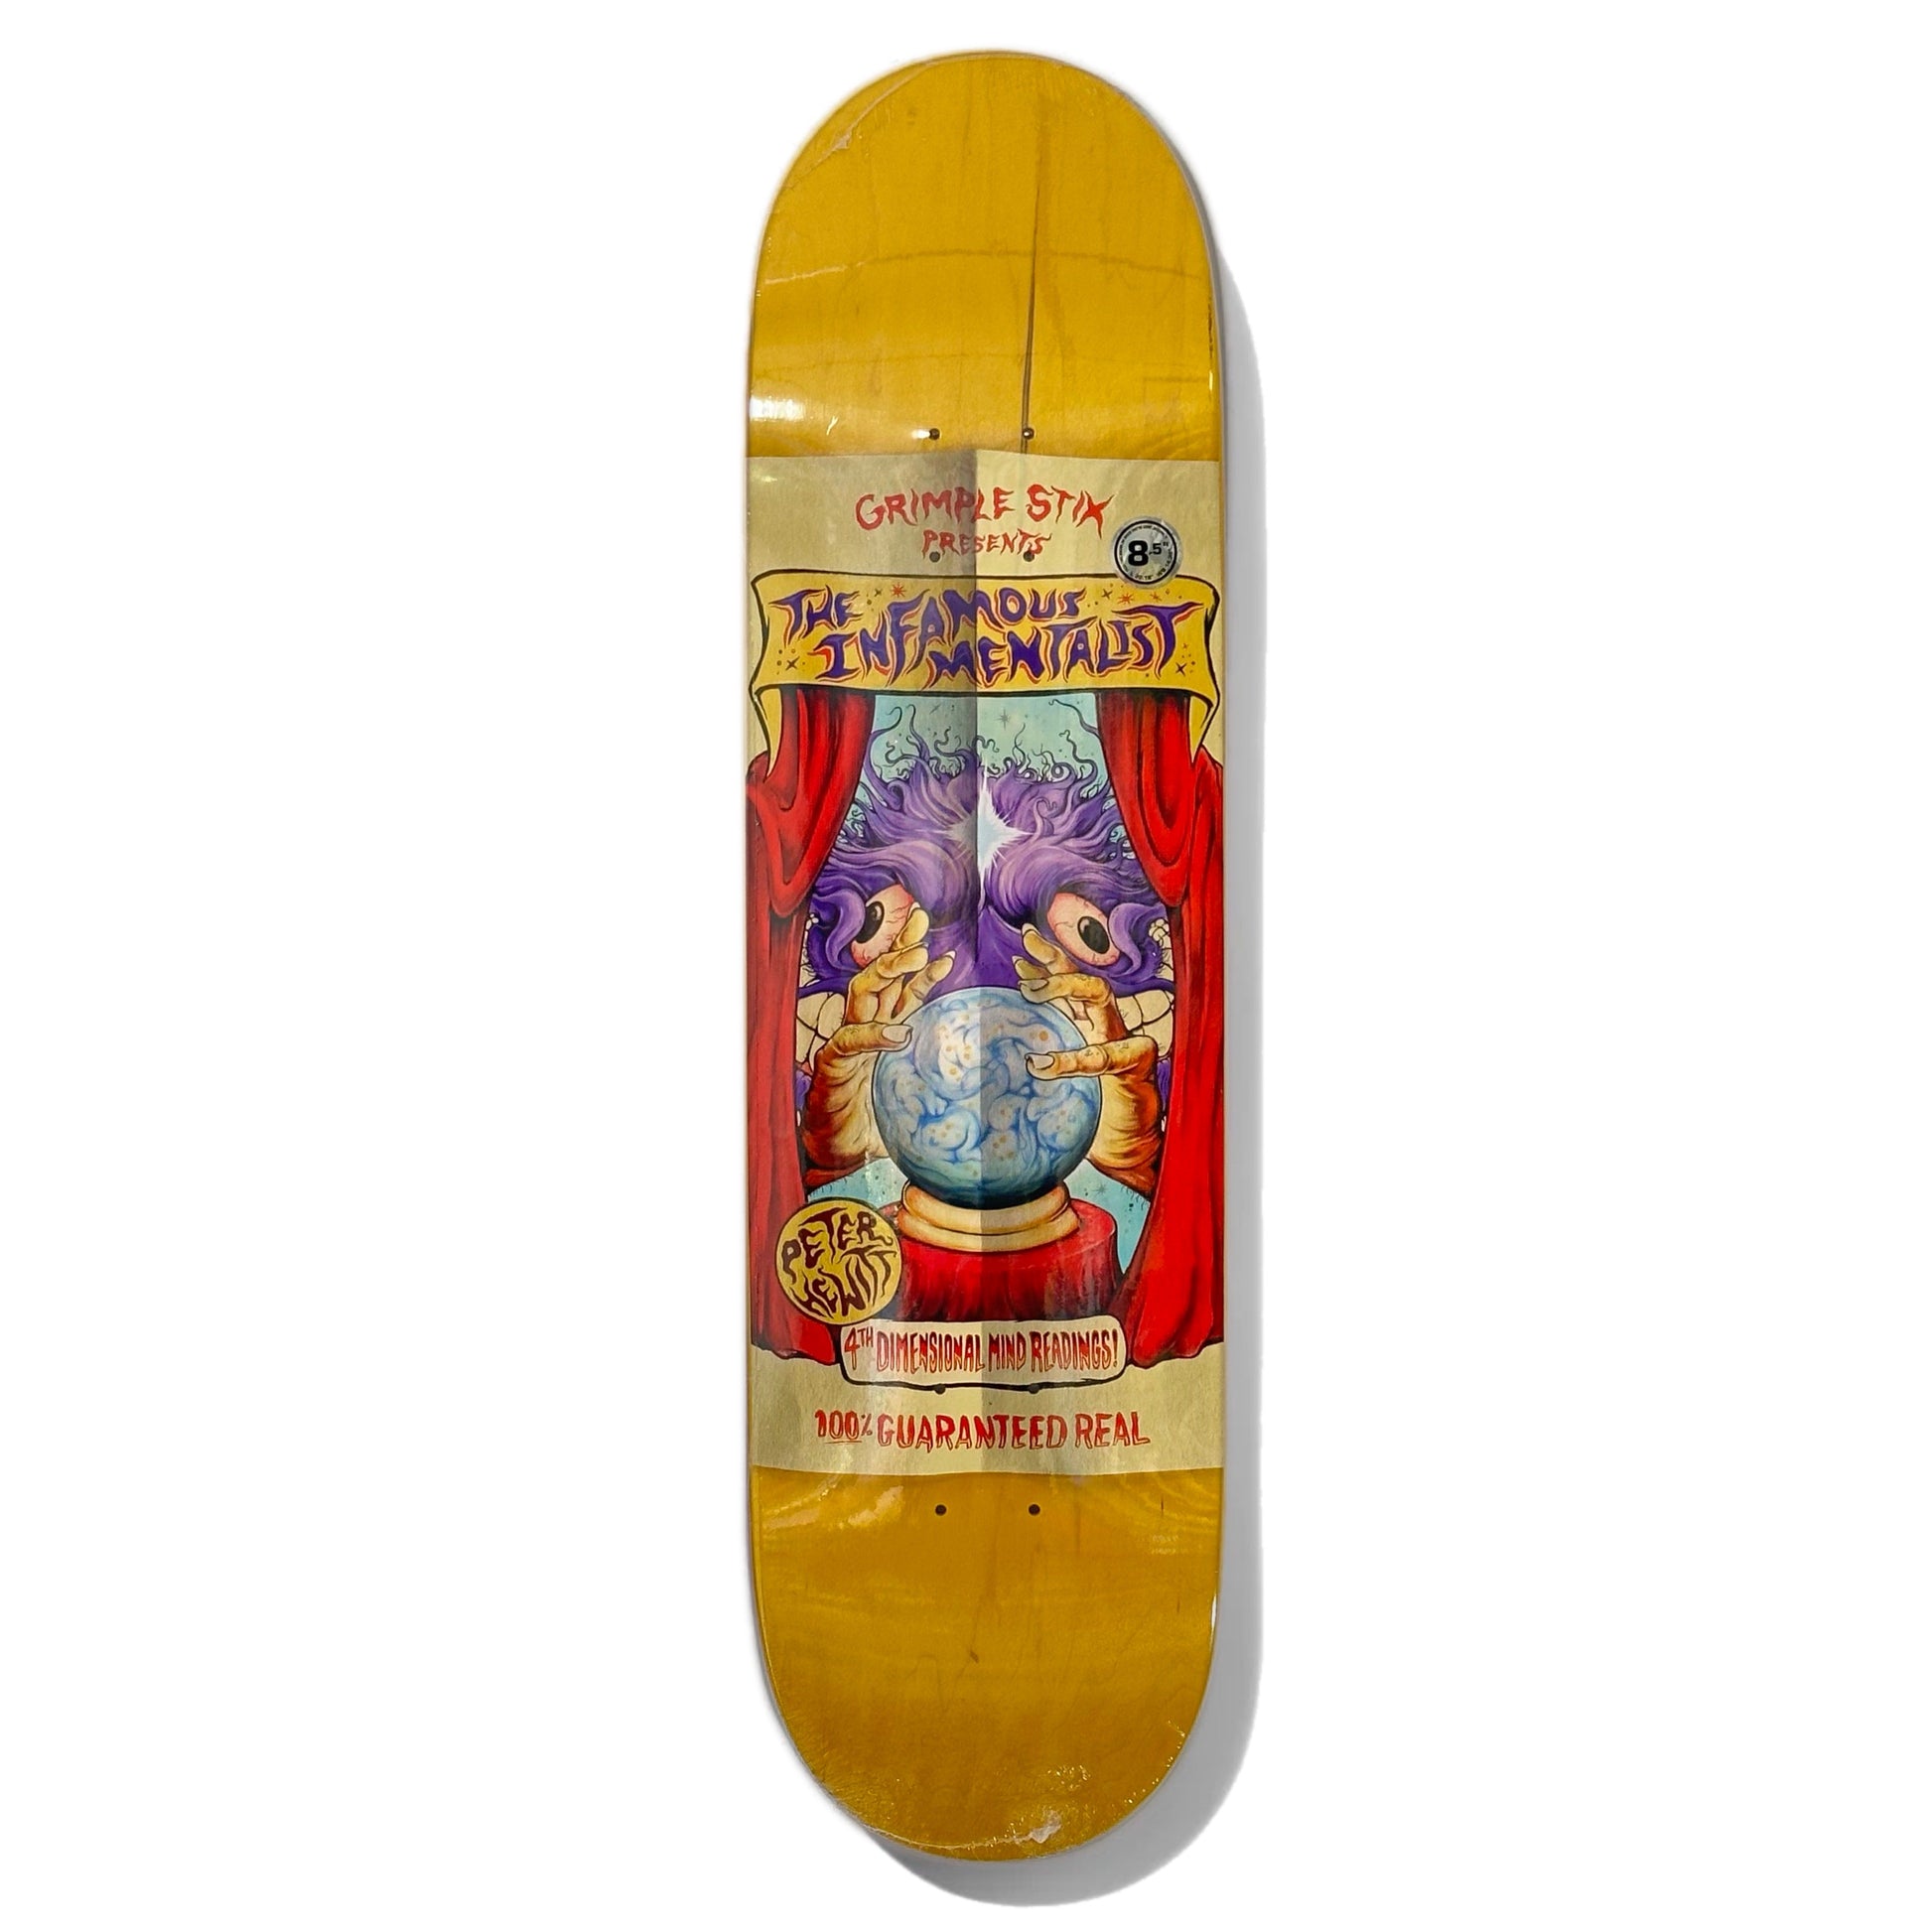 Grimple Stix Hewitt Slideshow Skateboard Deck; Yellow Background; Red; Yellow; Has Grimple Stix logo and 2 hands around an orb; Peter Hewitt; The Infamous Mentalist above the graphic;